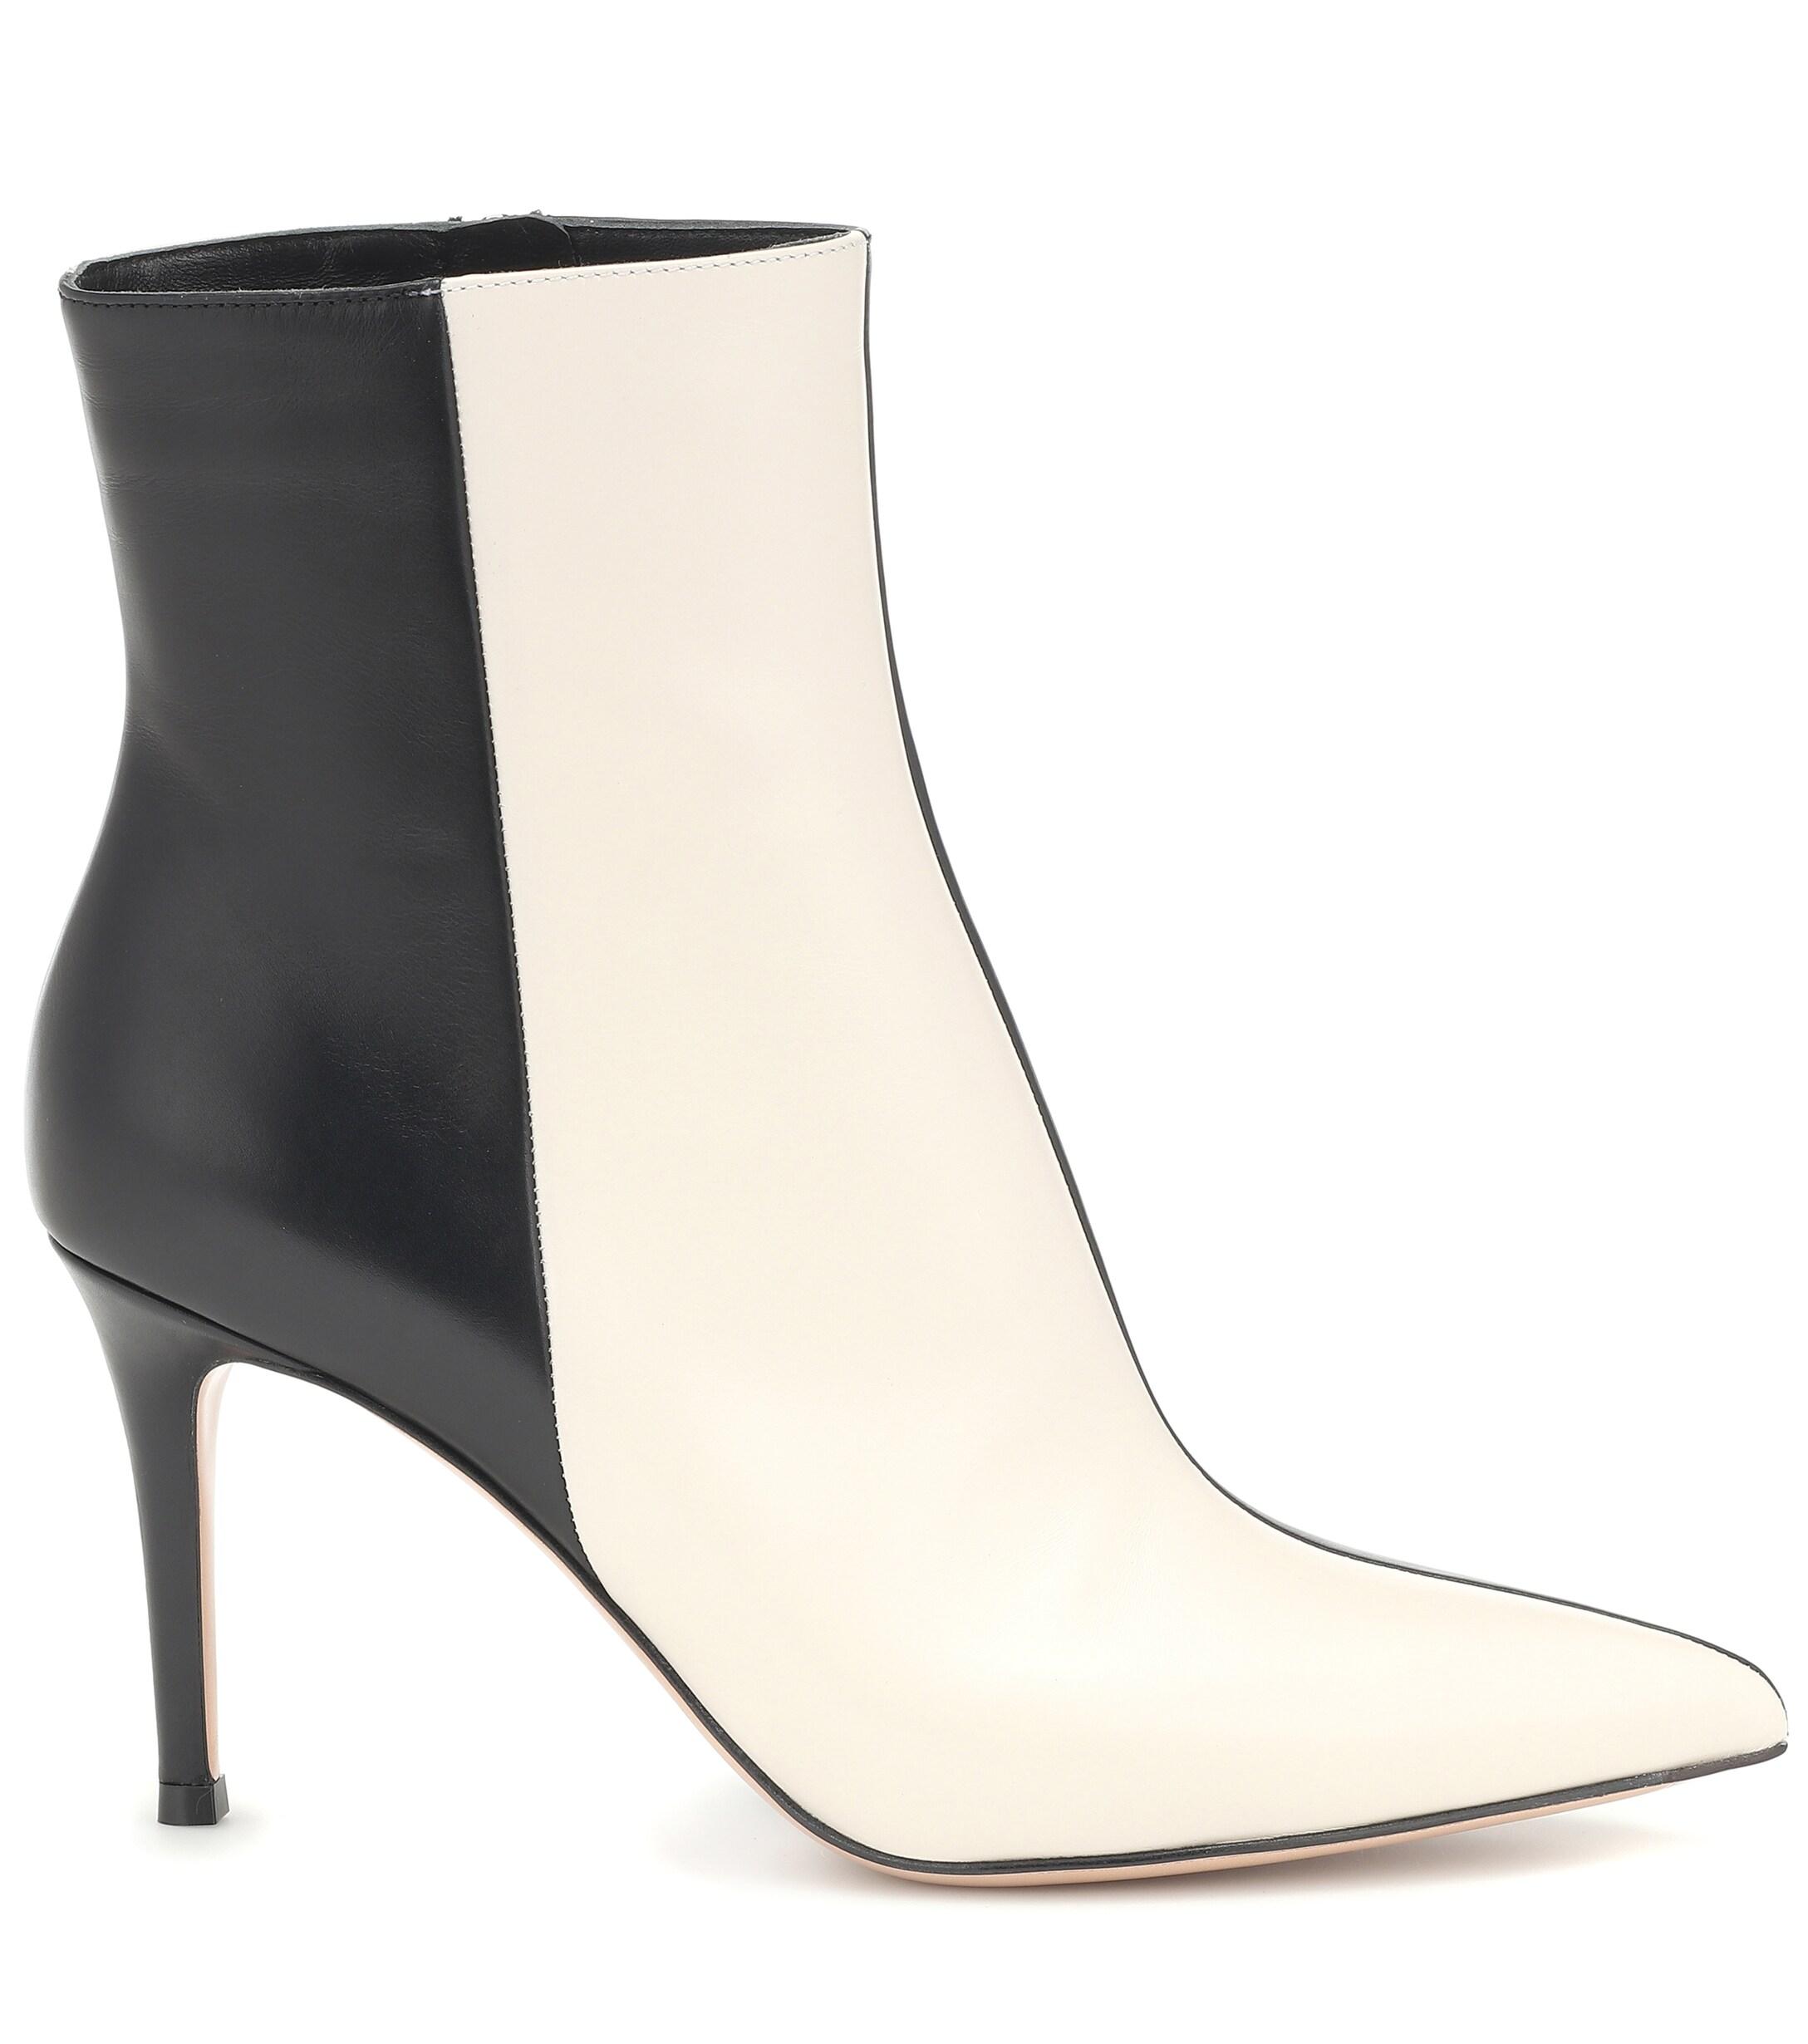 Gianvito Rossi Leather Ankle Boots in Black - Lyst